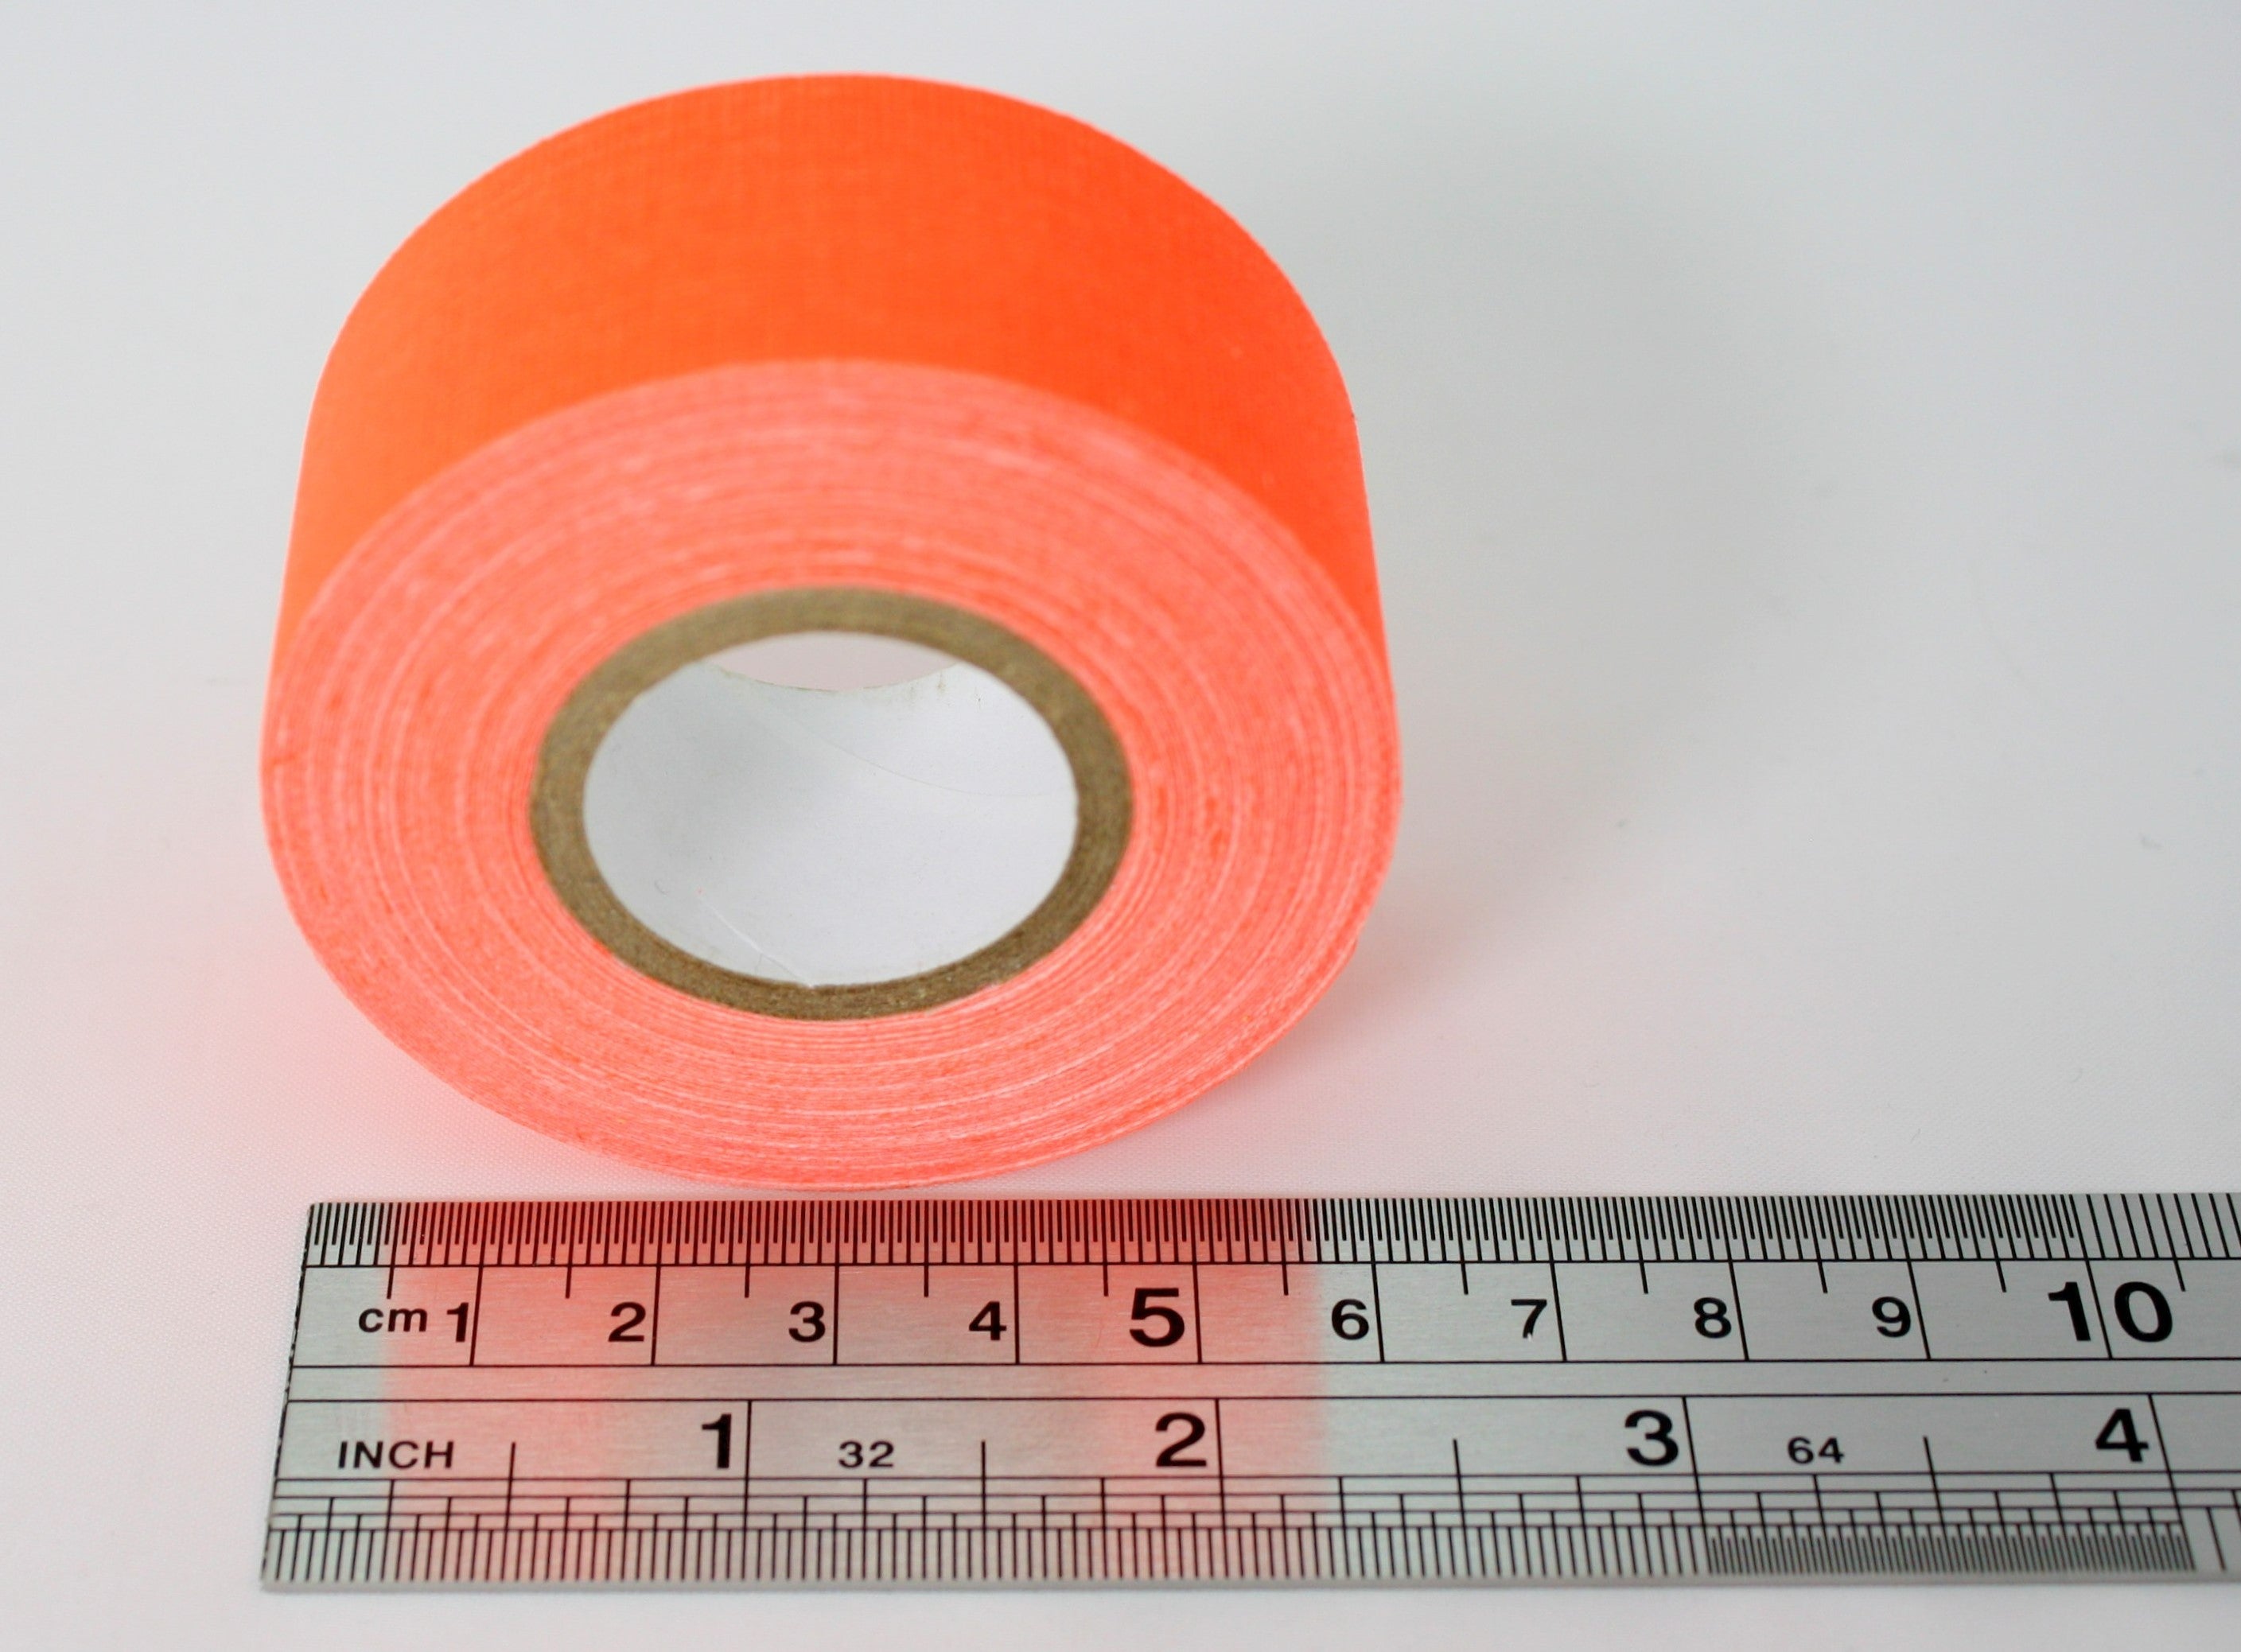 A close up of a single roll of fluorescent orange Micro Gaffer 1" tape. The roll is next to a metal ruler showing that the widest part is just over 6cm